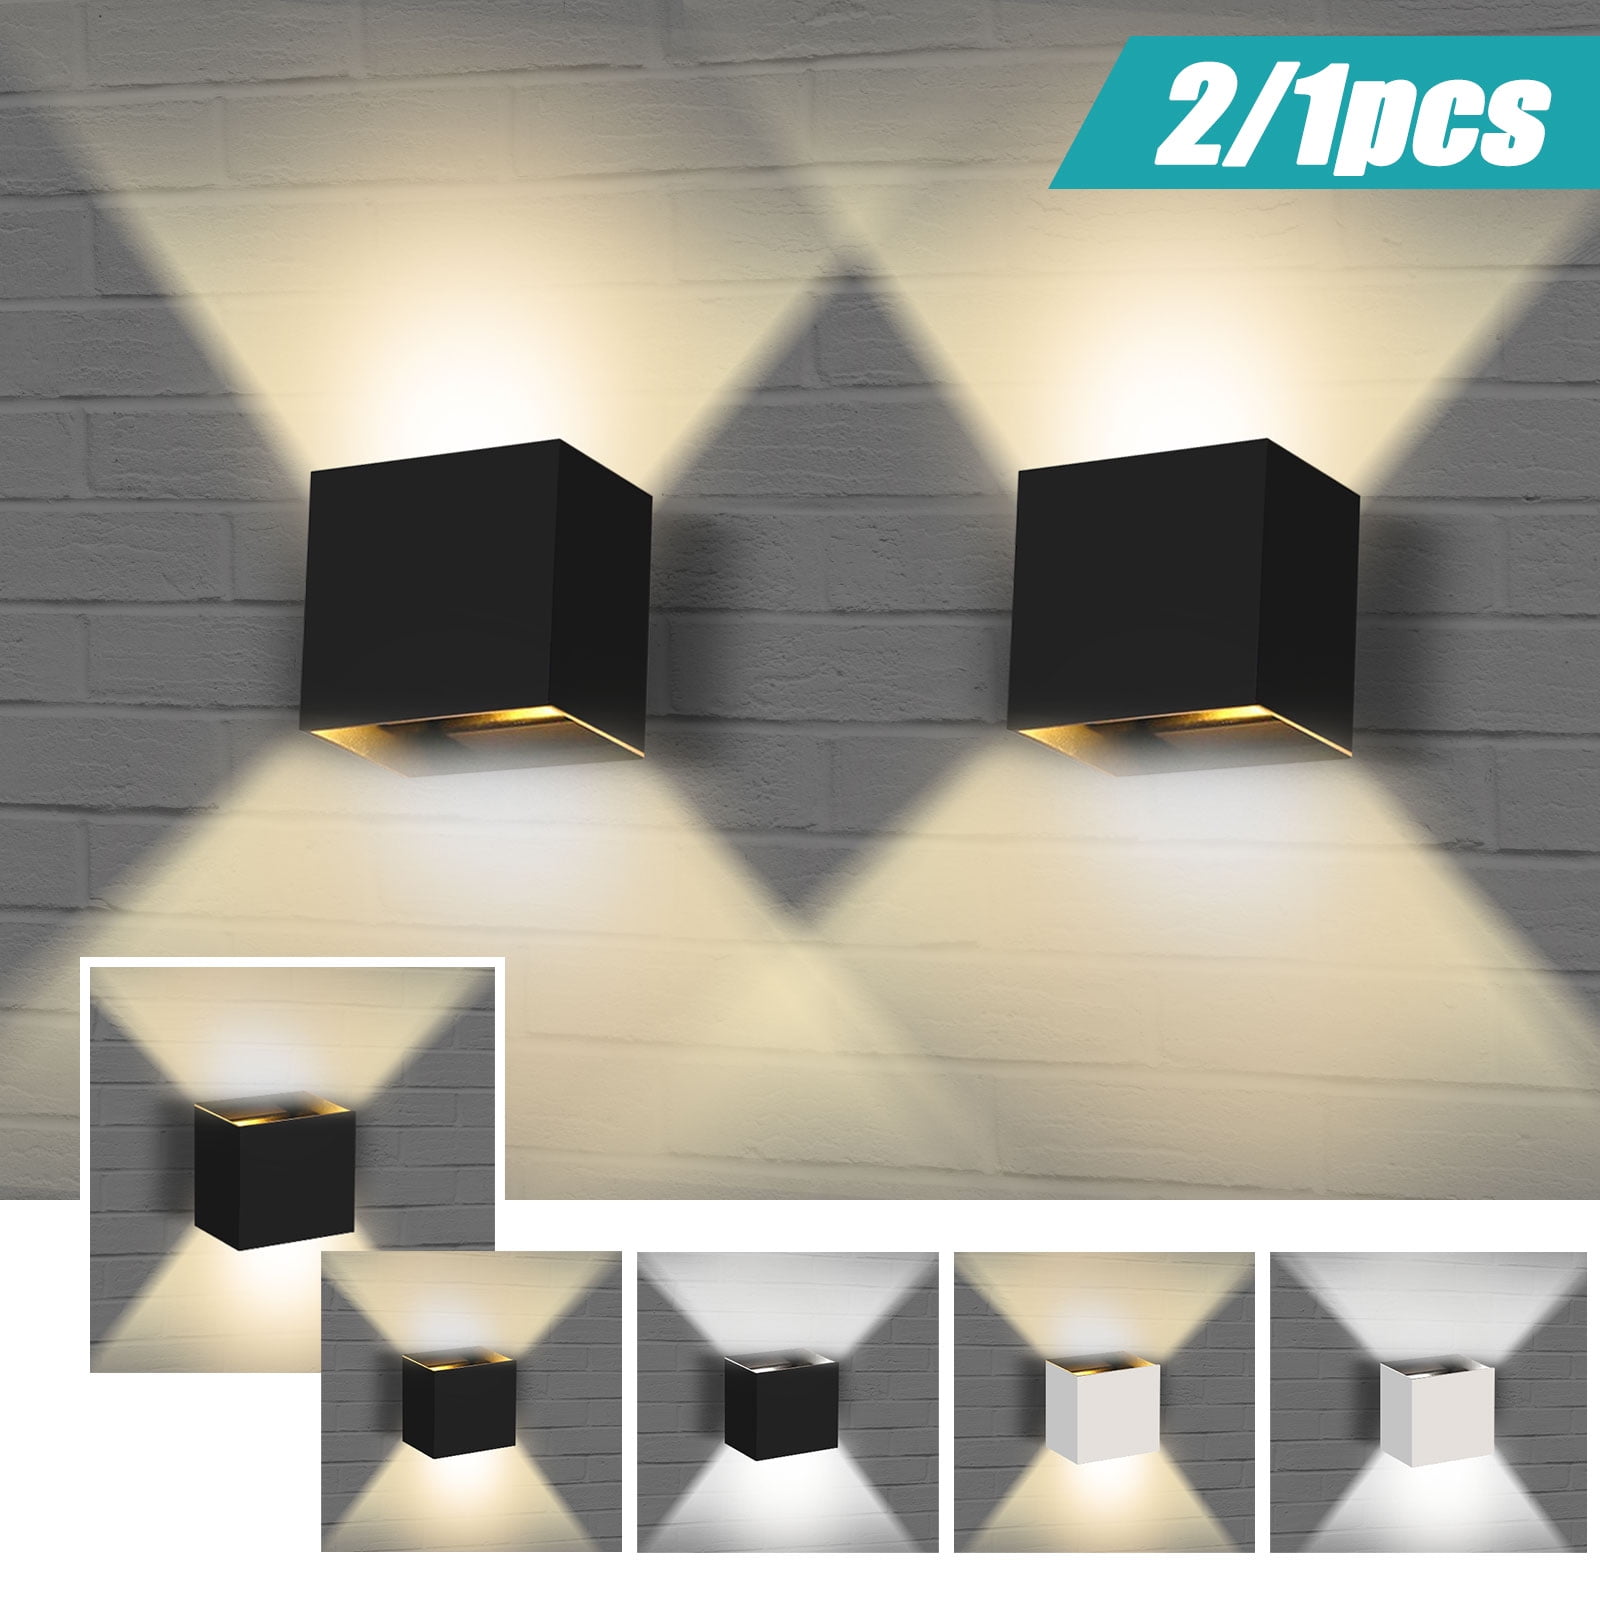 Torch Lamps Wall-Mounted Sconce Light Home Hallway Night Lighting-3 Available 